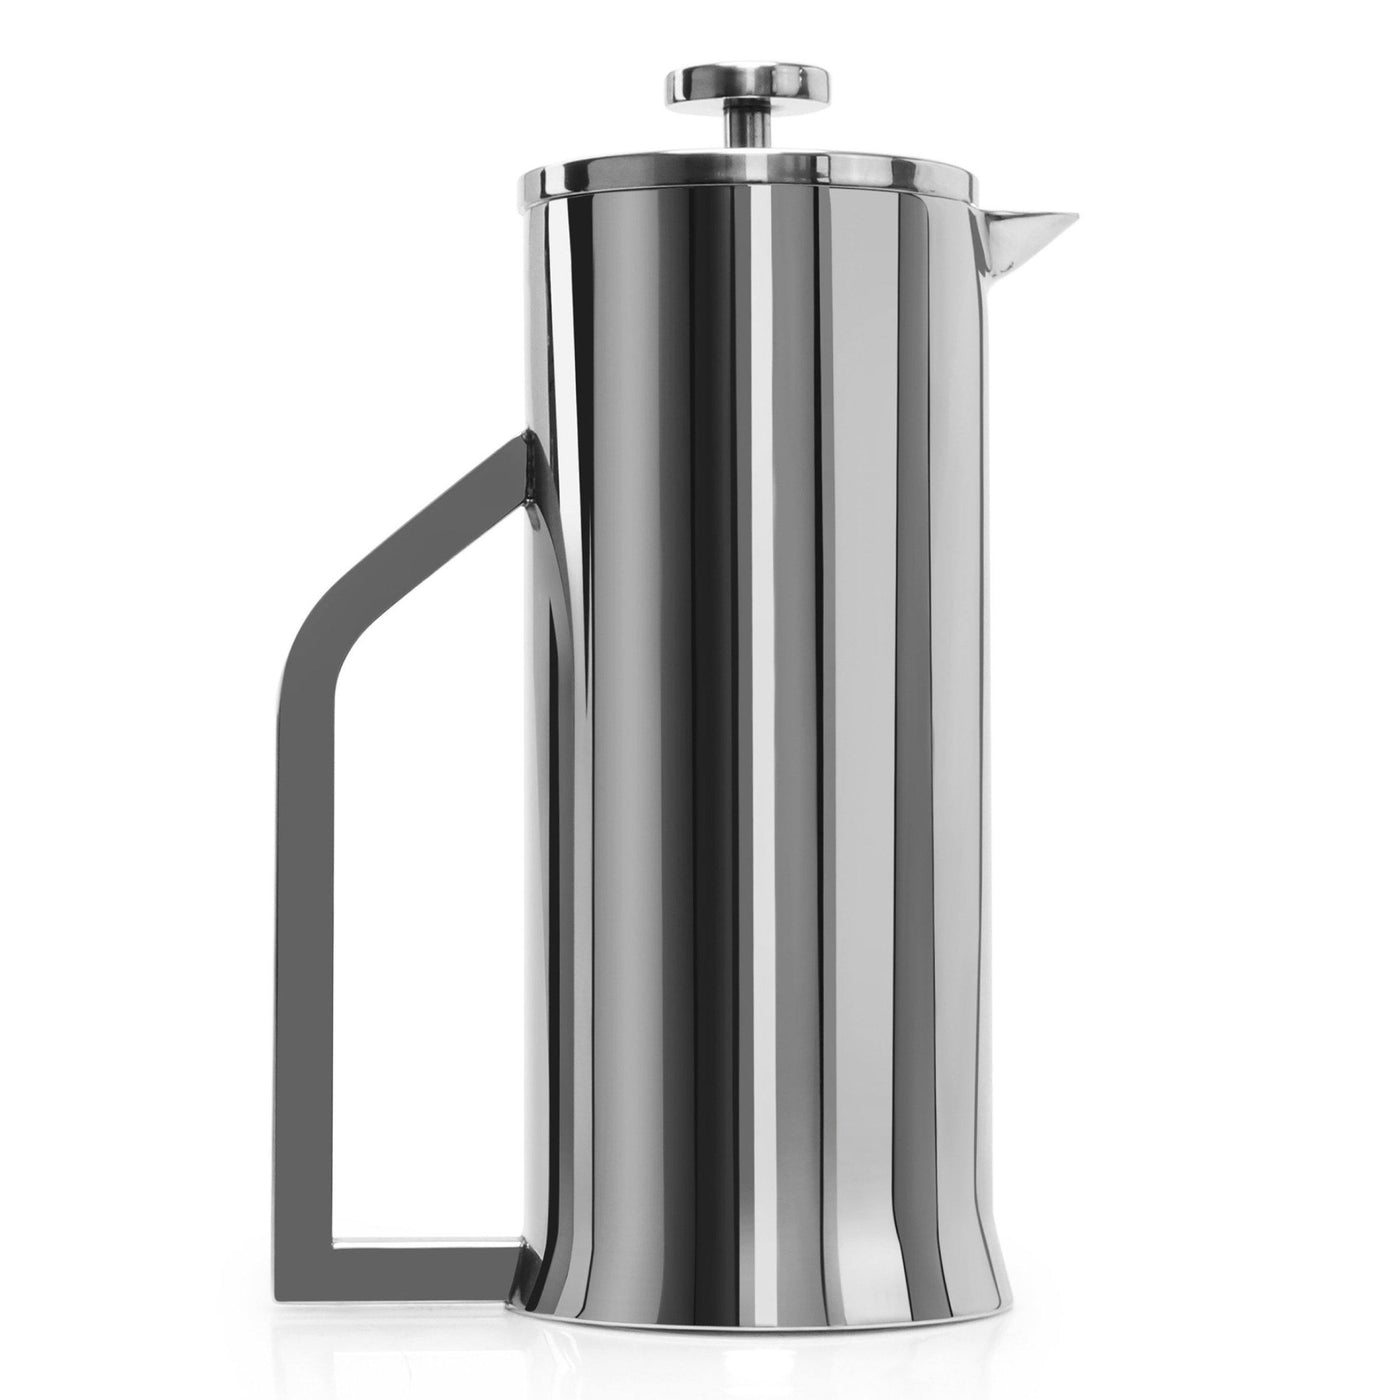 Stainless Steel French Press Coffee Maker - Lafeeca